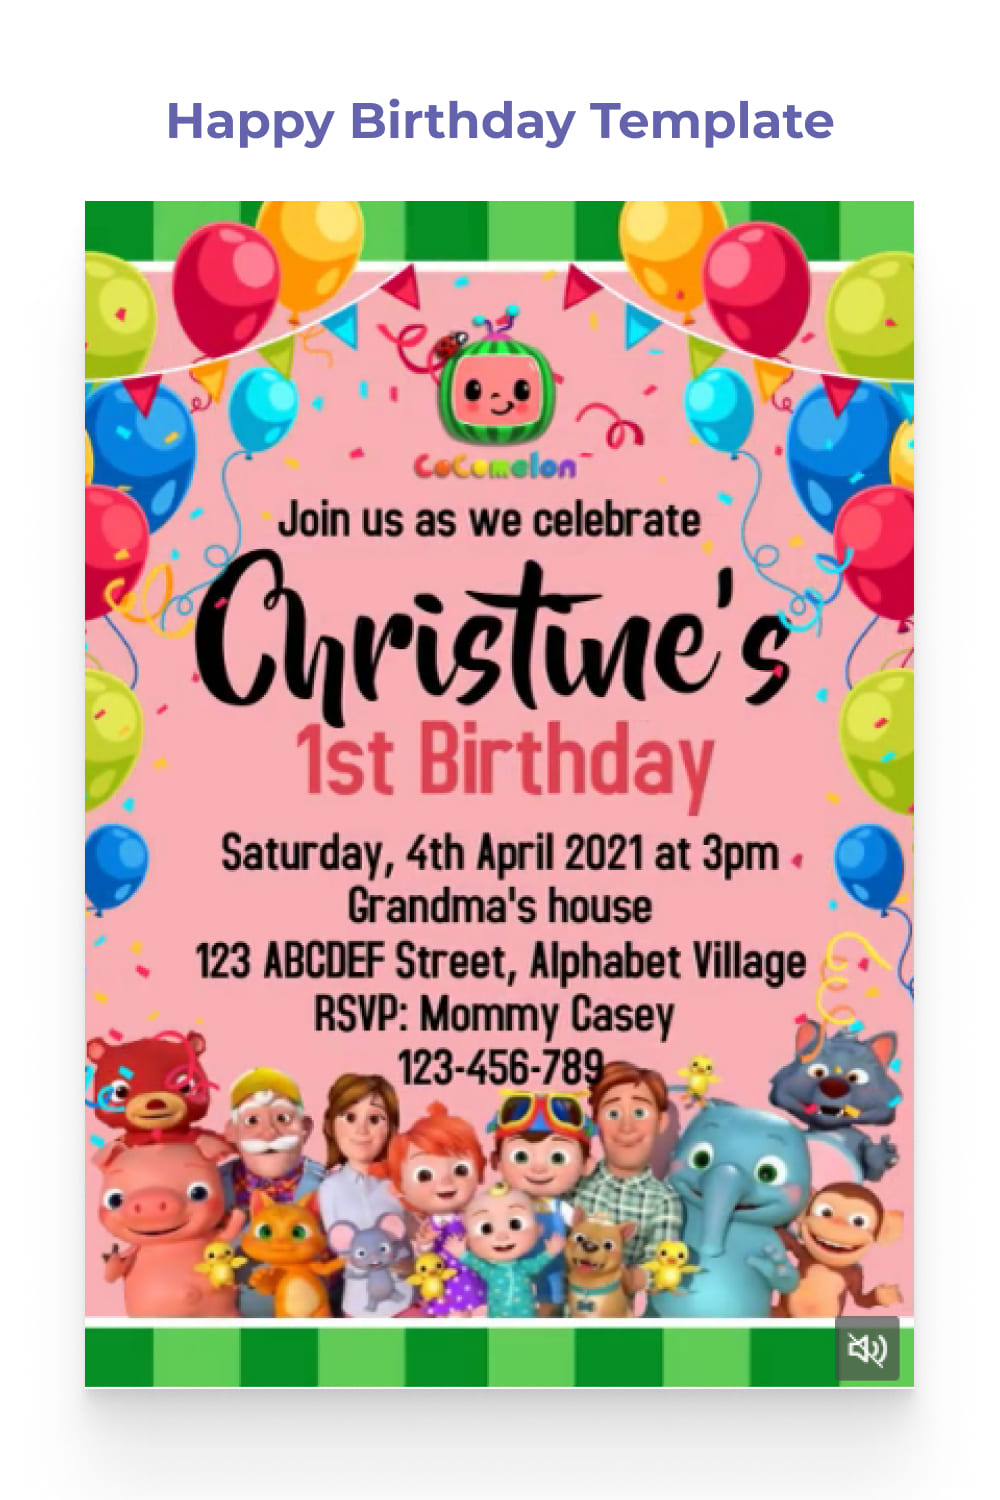 Pink birthday invitation with Cocomelon characters.